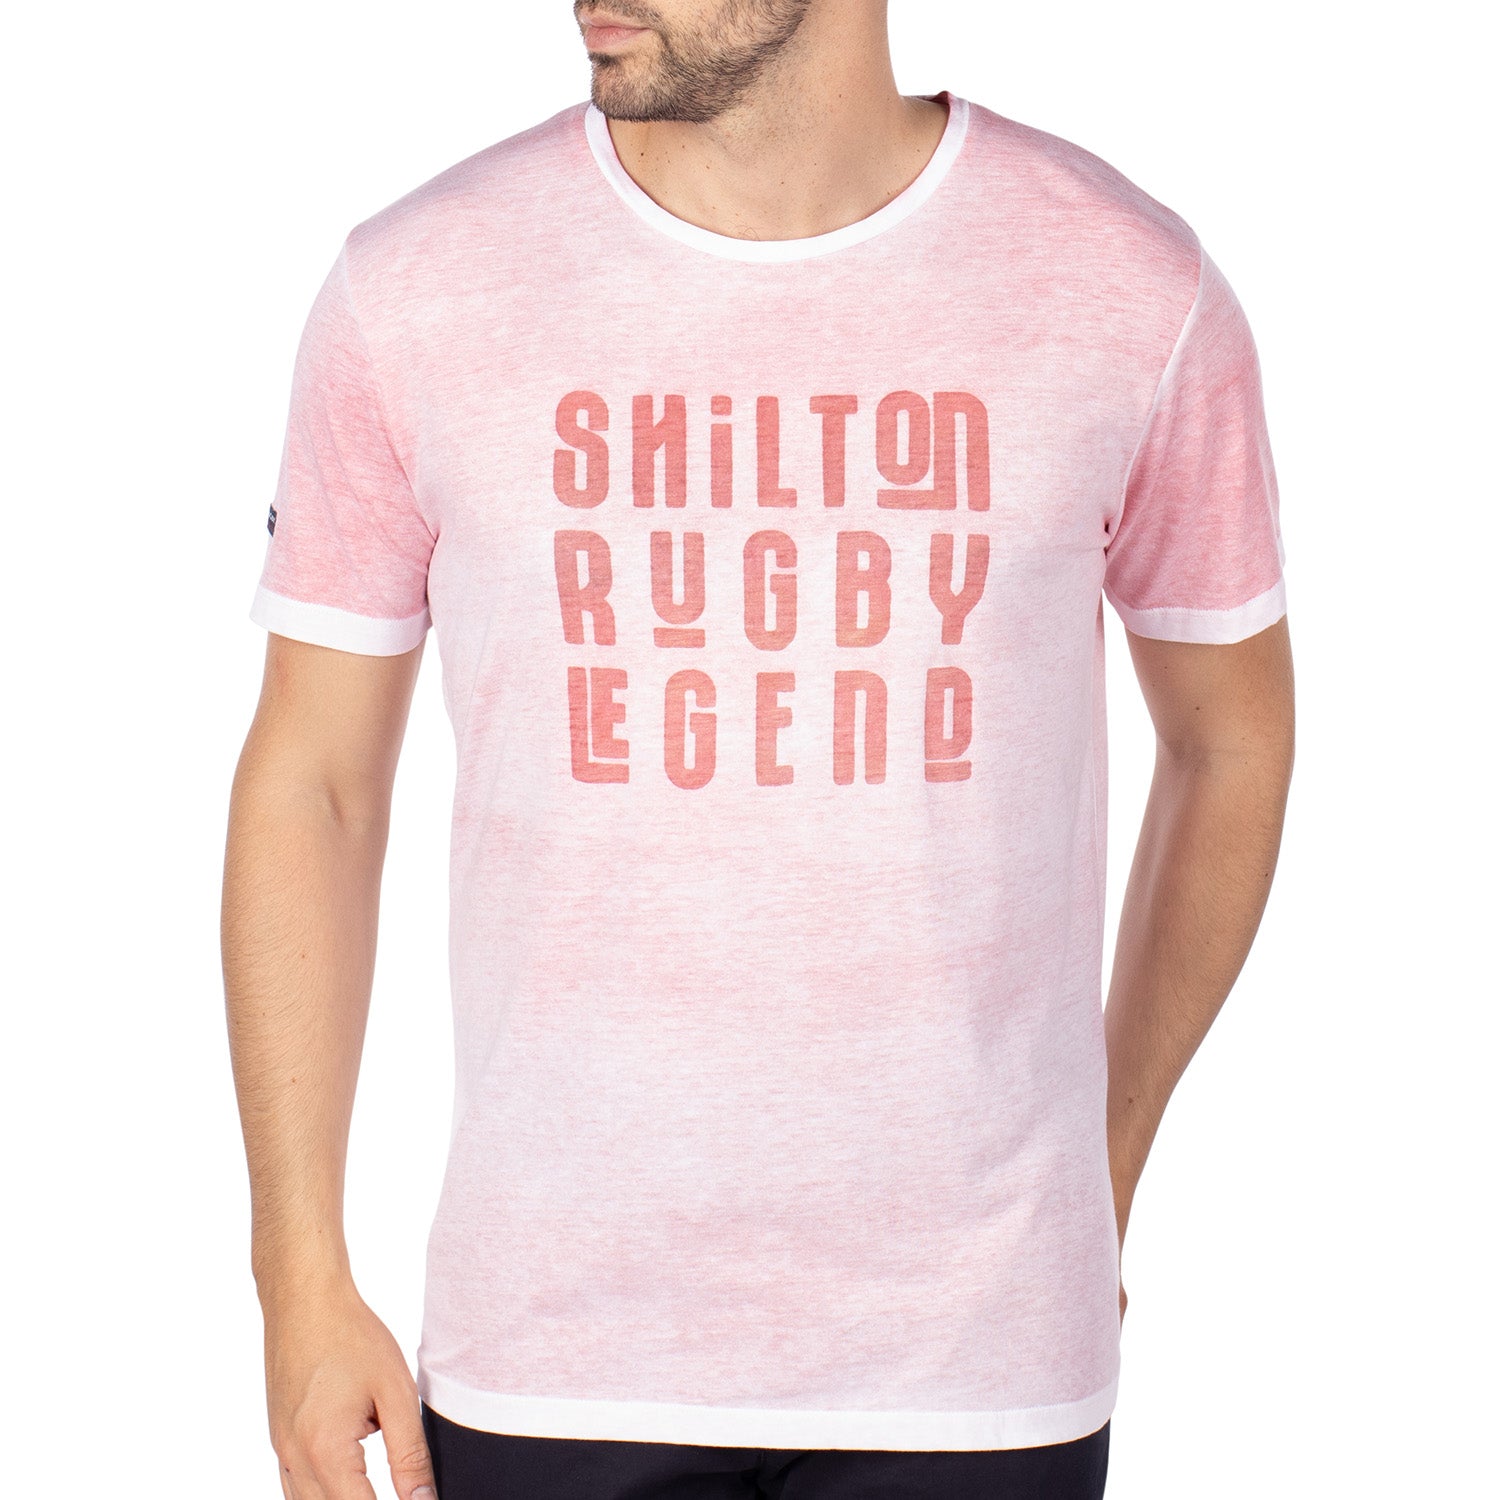 T Shirt Vintage Rugby Rouge